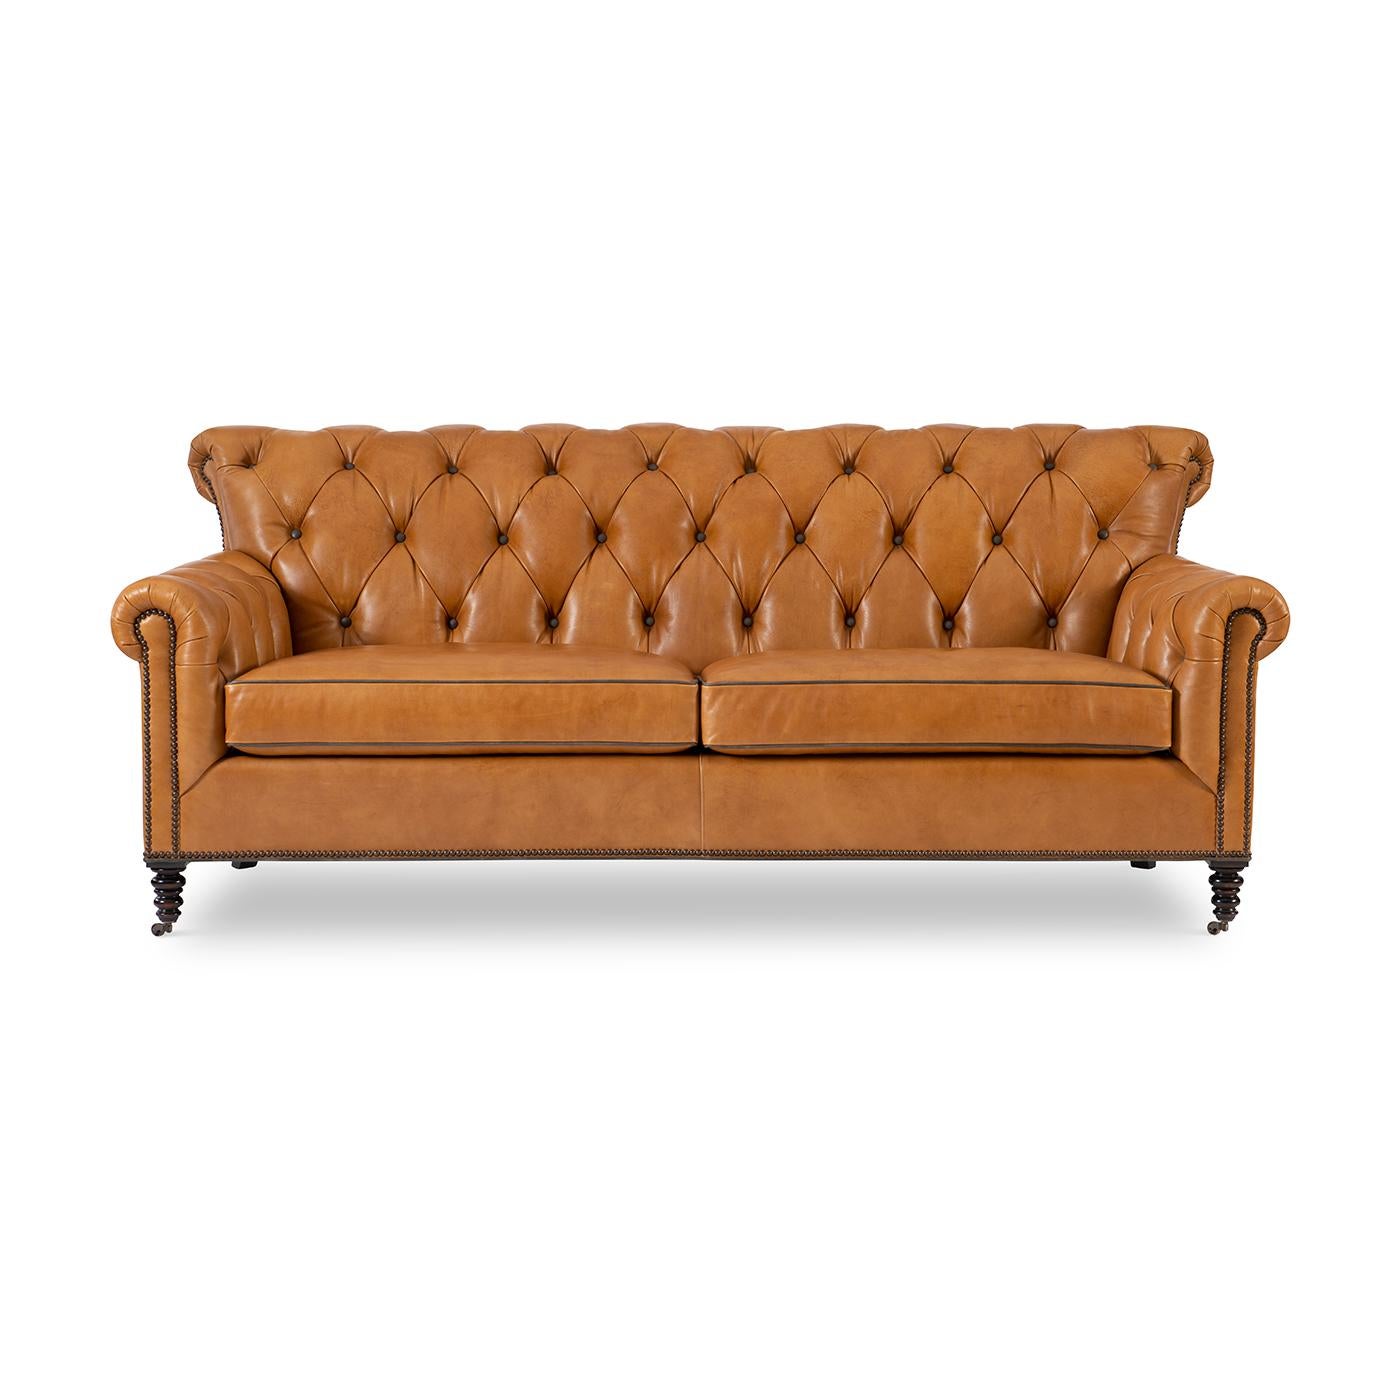 Classic Tufted 3 seater sofa, With a tufted and rolled backrest and arms, with a two-boxed seat cushion, wonderful detail nailheads and turned and tapered legs.

A wonderful classic design that works well with almost any decor.

Completely Made